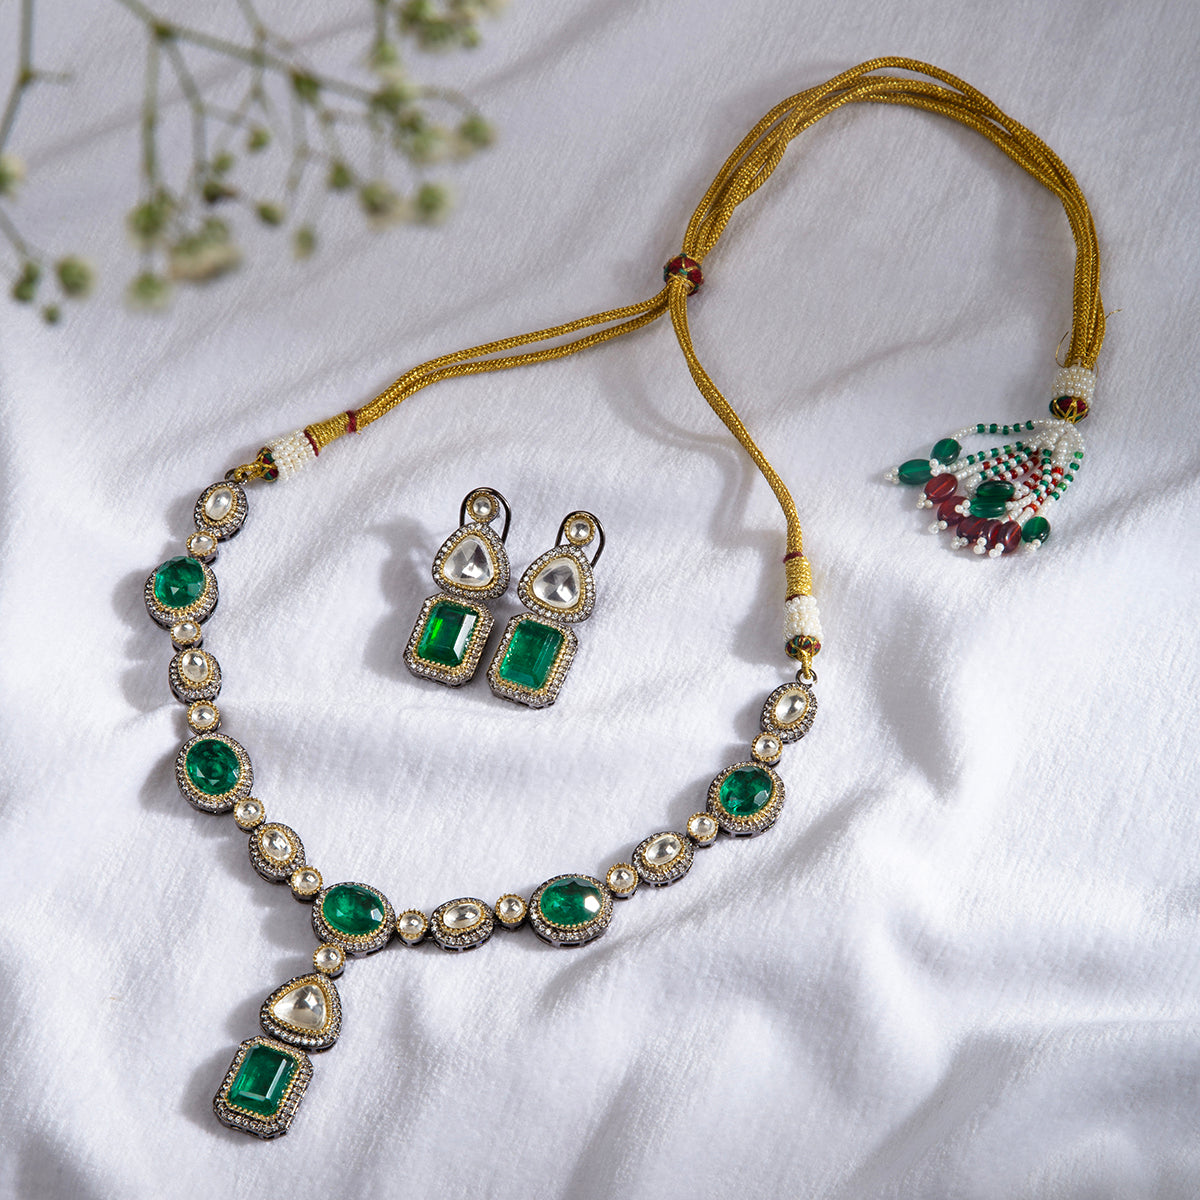 The Royal Heritage Necklace & Earrings